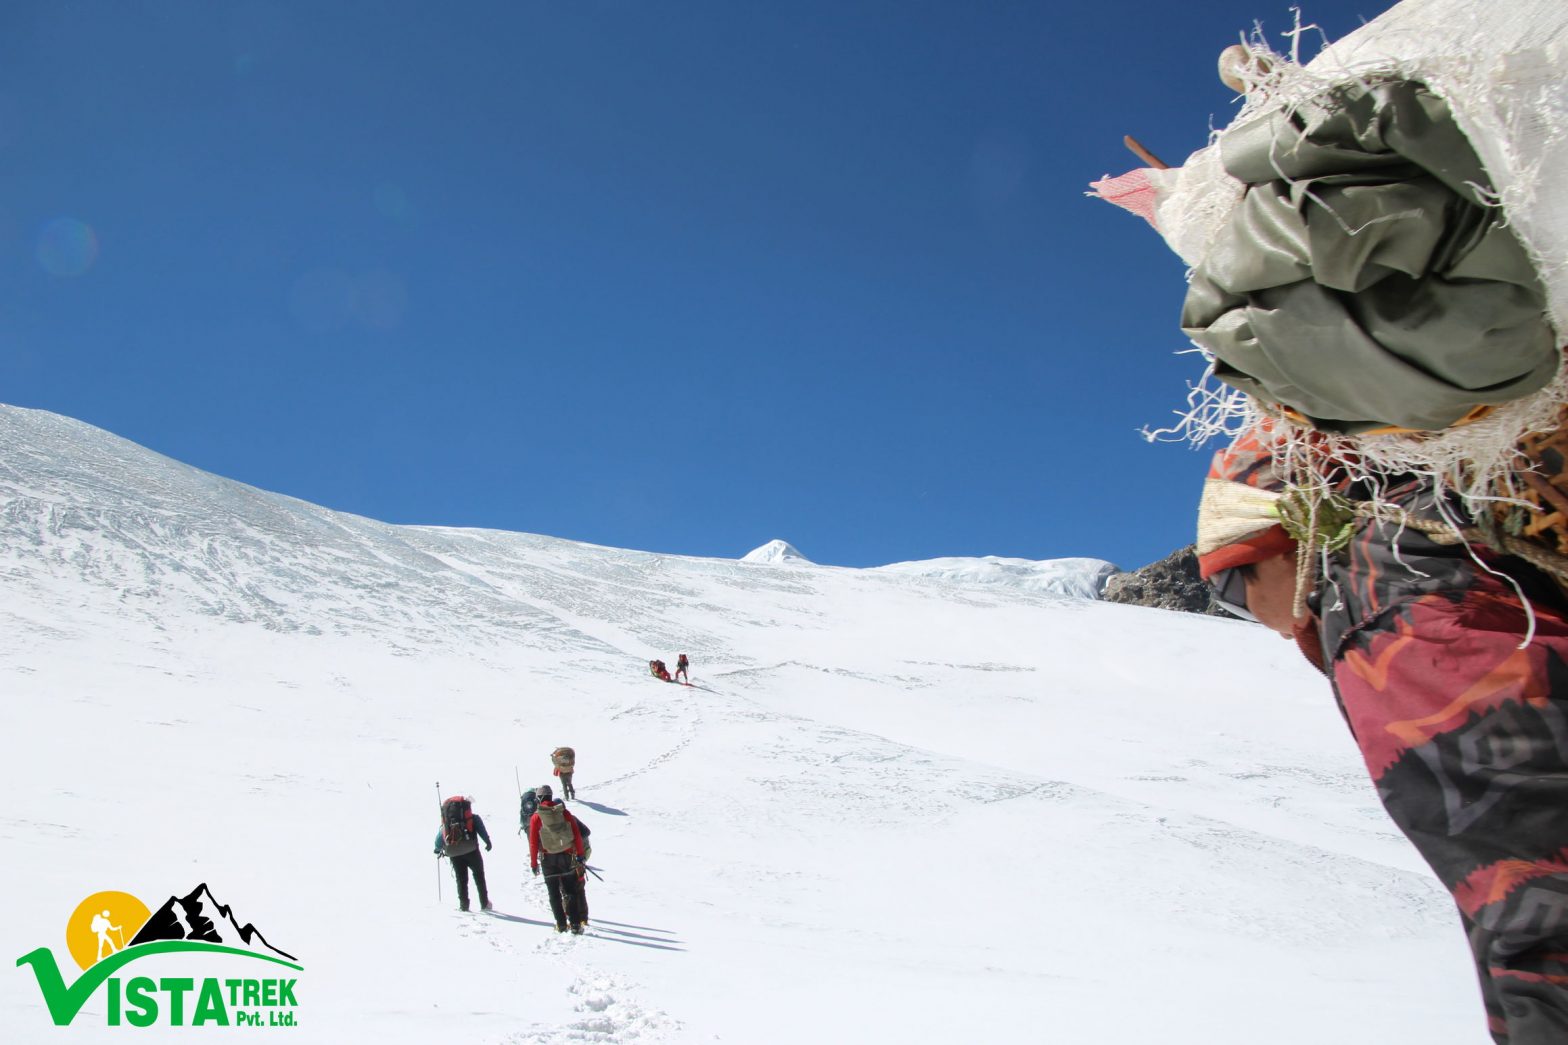 How hard is Mera peak climbing? Essential tips for safe and successful climb.